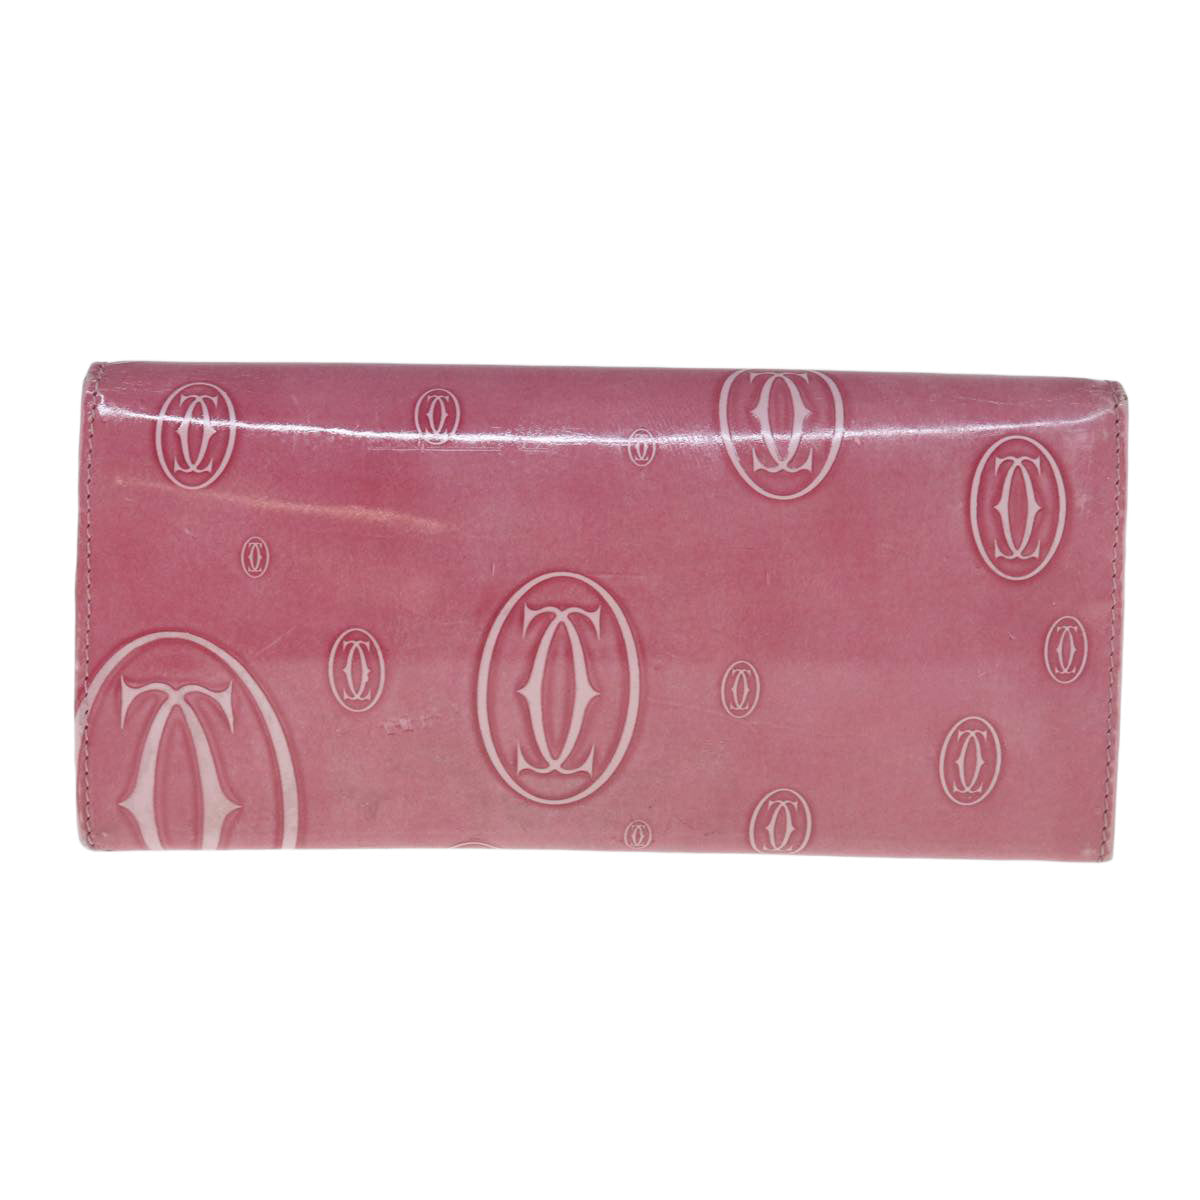 CARTIER Happy Birthday Wallet Patent leather Pink Auth am5559